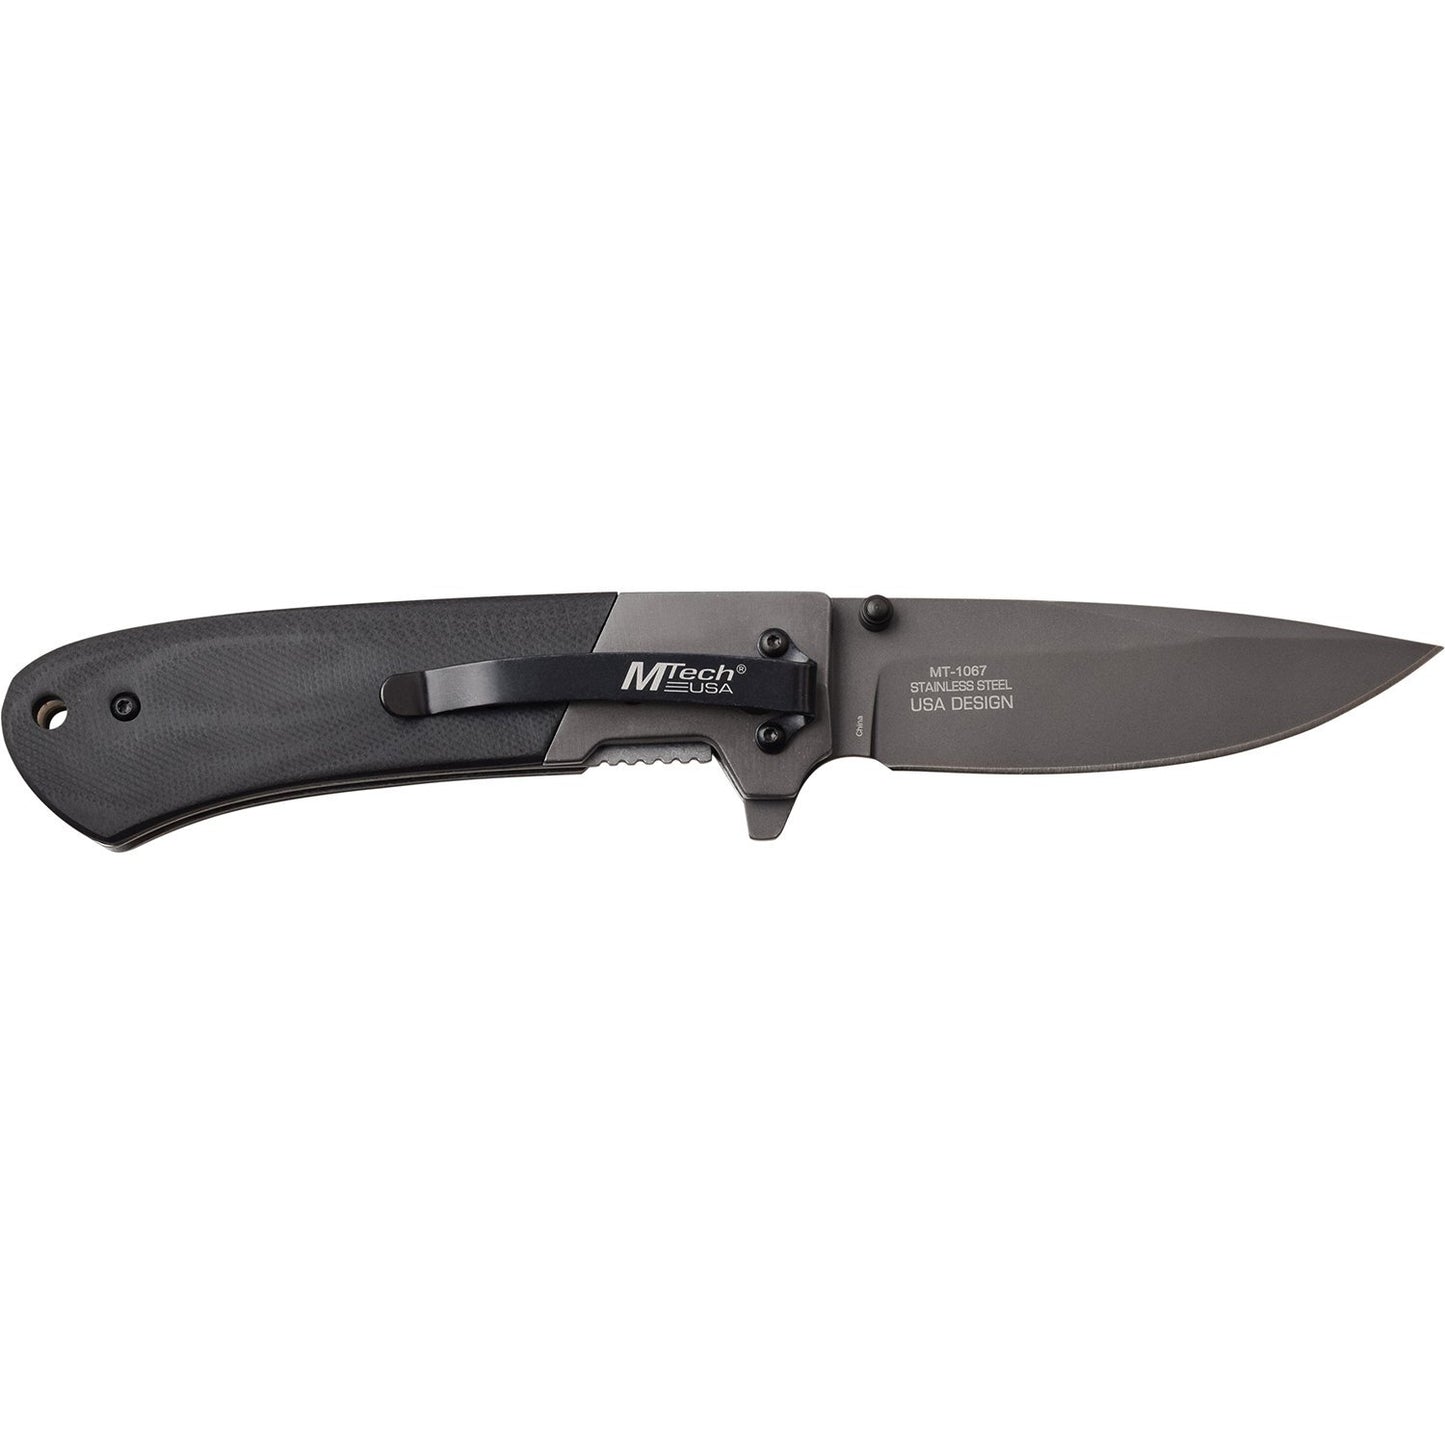 Mtech Mtech Drop Point Hunting Folding Knife - Gray Smooth G10 Handle #mt-1067Gy Dim Gray